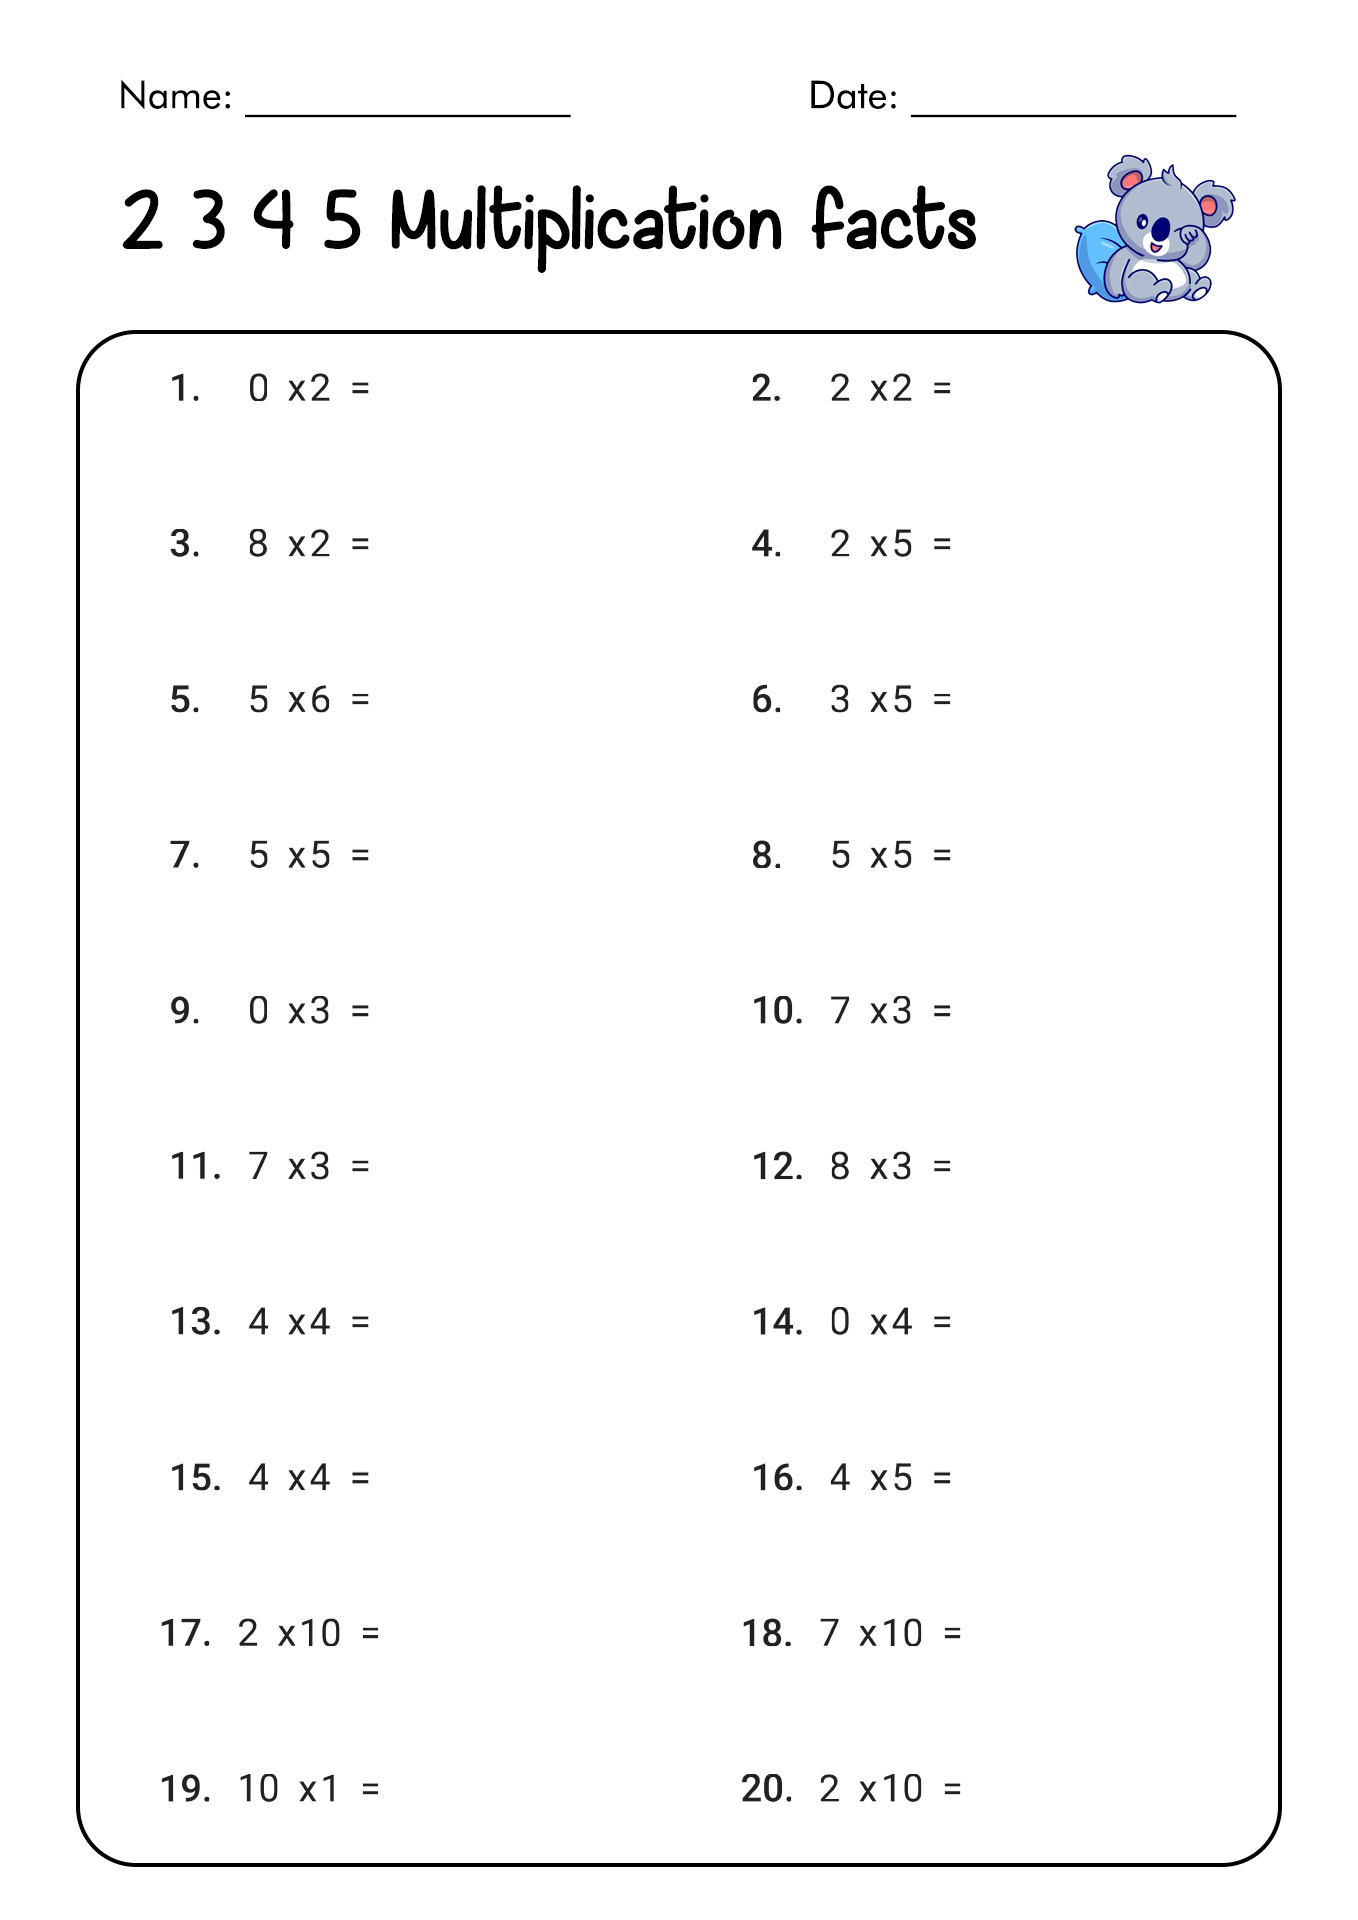 multiplying-5s-worksheet-printable-worksheets-and-activities-for-teachers-parents-tutors-and